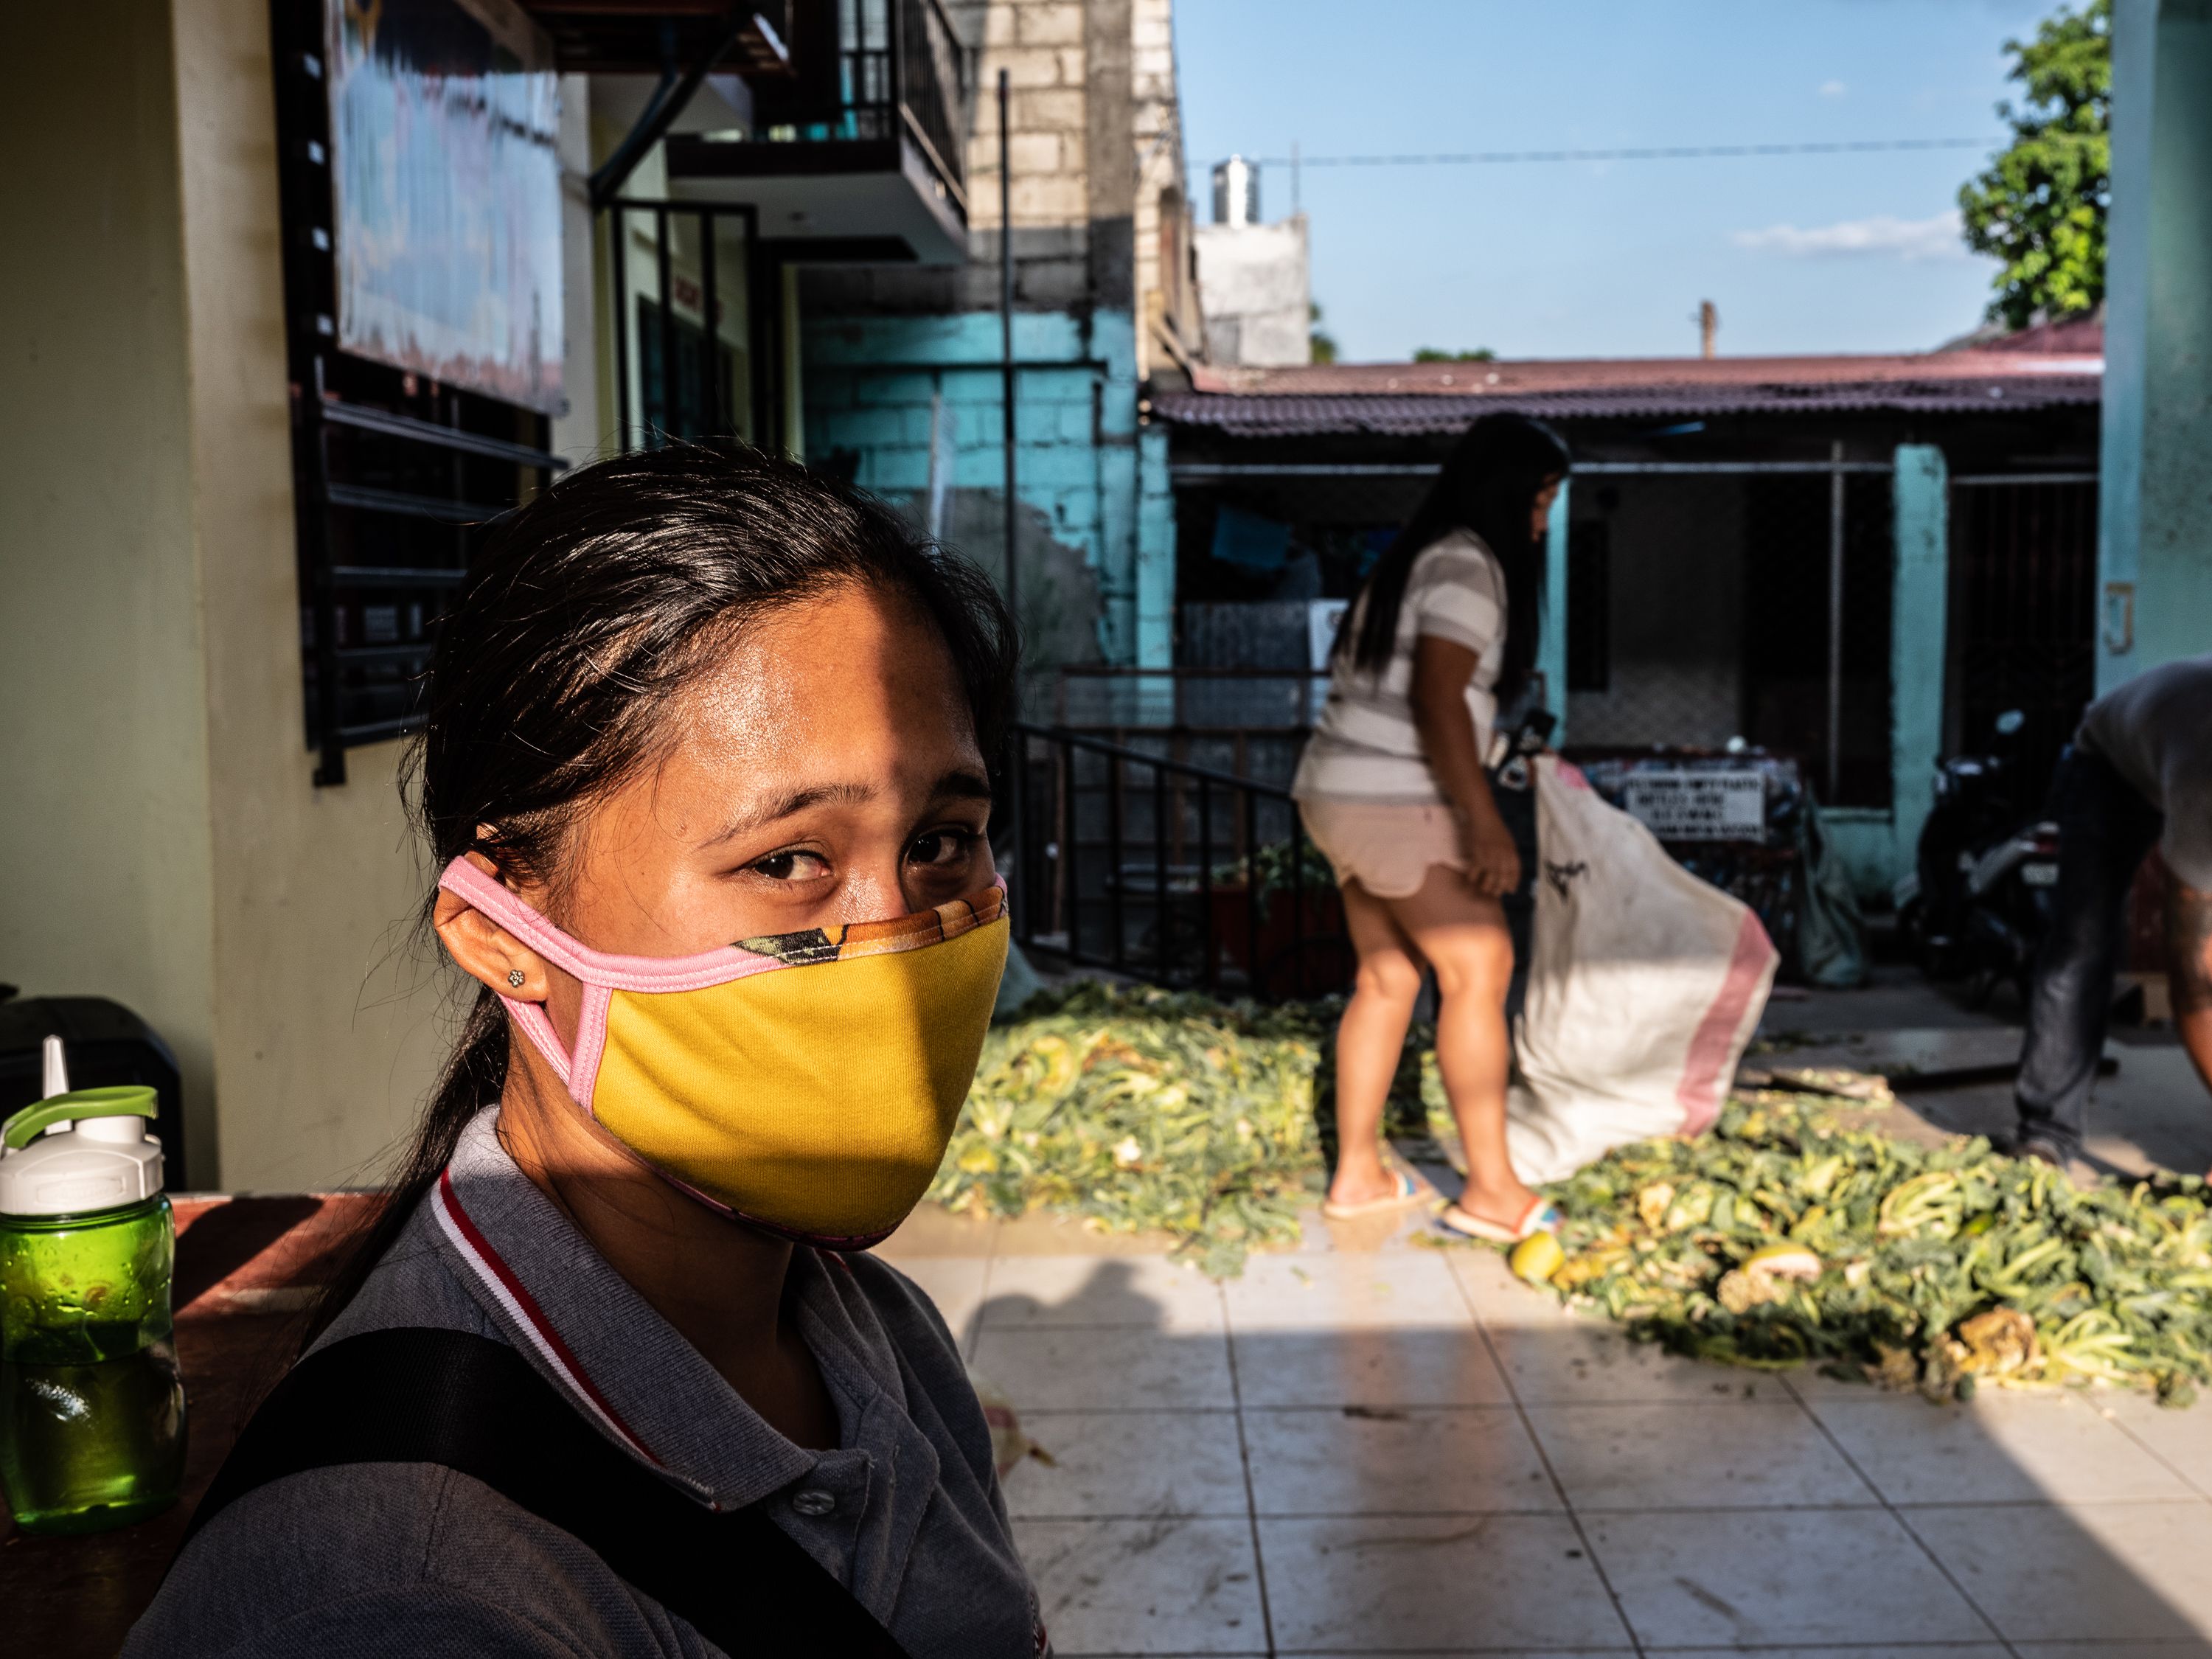 Analyn Martinez, a volunteer health care worker, rests after her shift, which includes checking in on quarantined people and packing and distributing relief goods. Image by Xyza Bacani. Philippines, 2020.